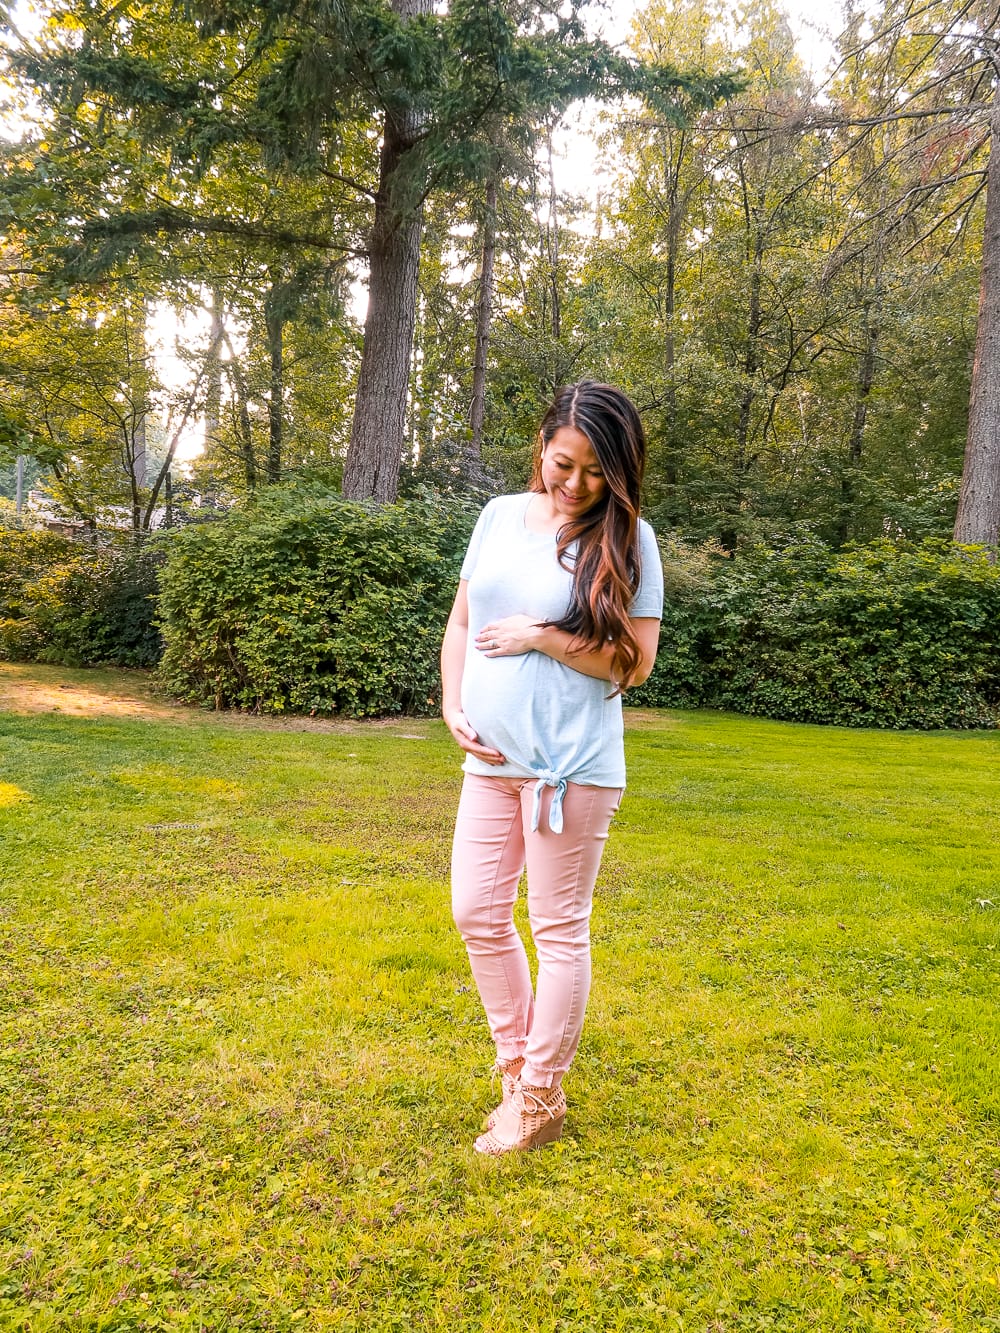 Third Trimester Fall Outfit Ideas